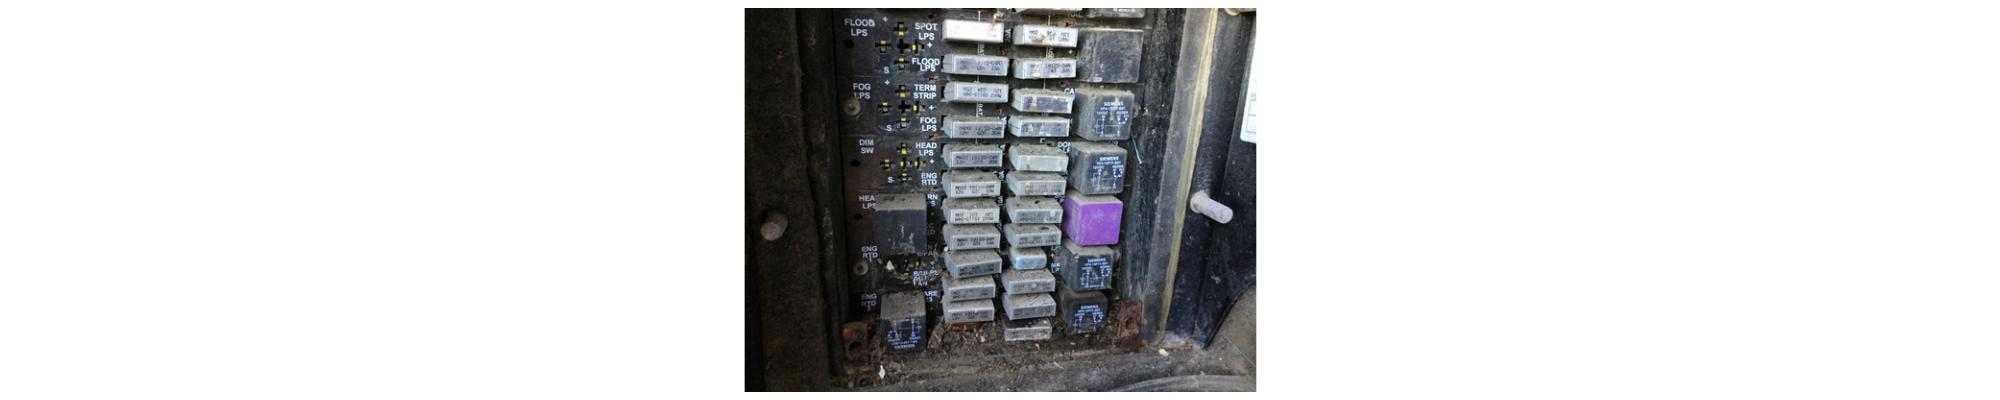 KENWORTH T600 Fuse Box in Spencer, IA #24493033